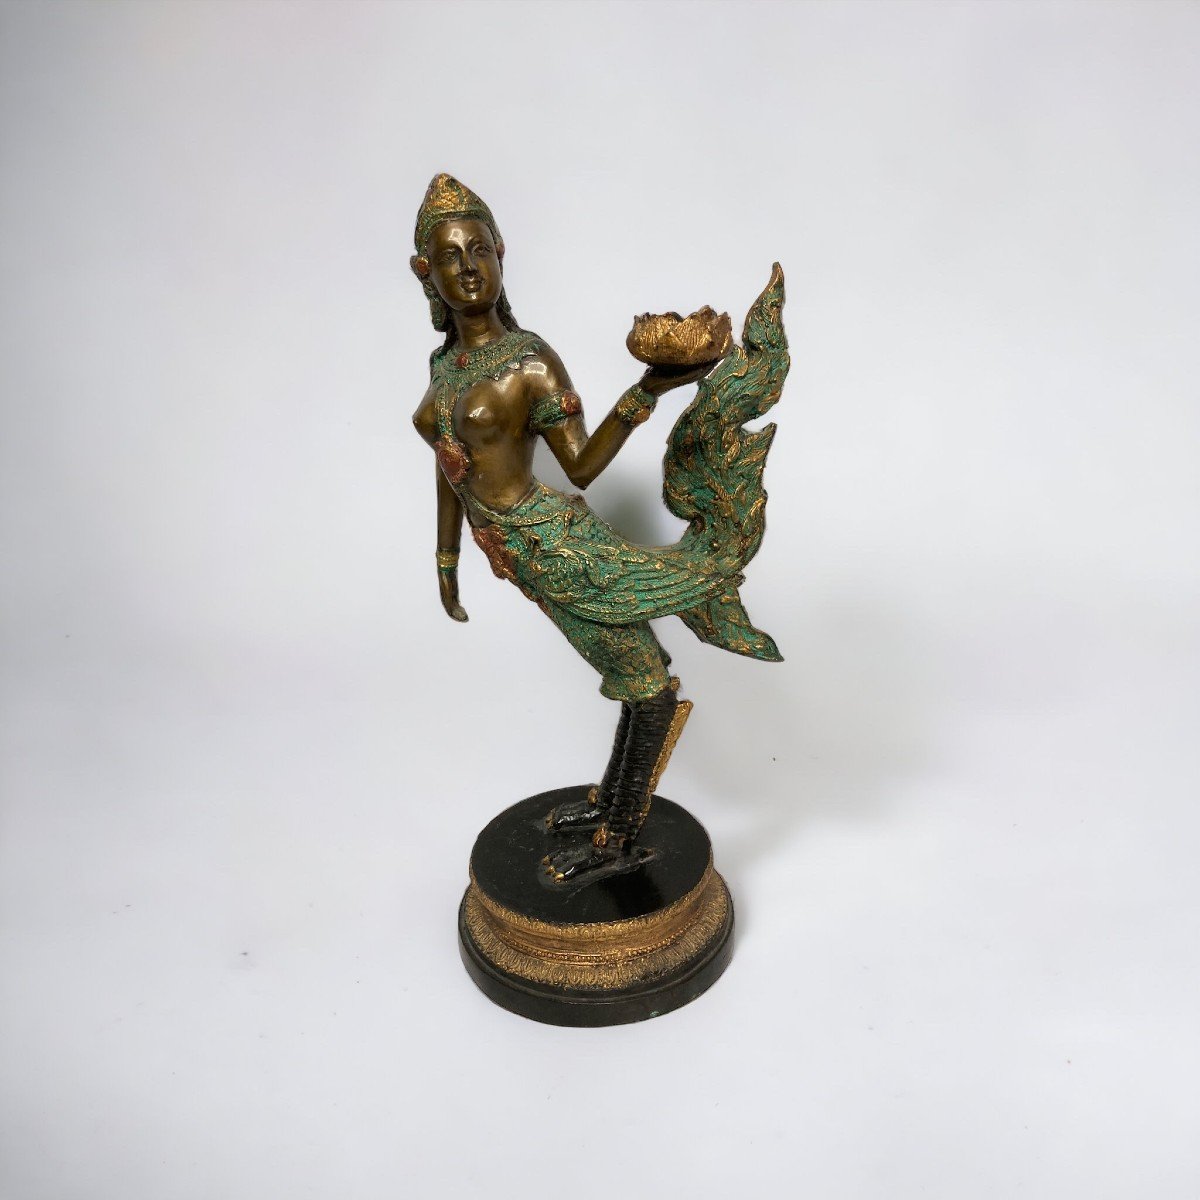 Indochina Bronze Figuring A Woman With Hen's Feet Early 20th Century